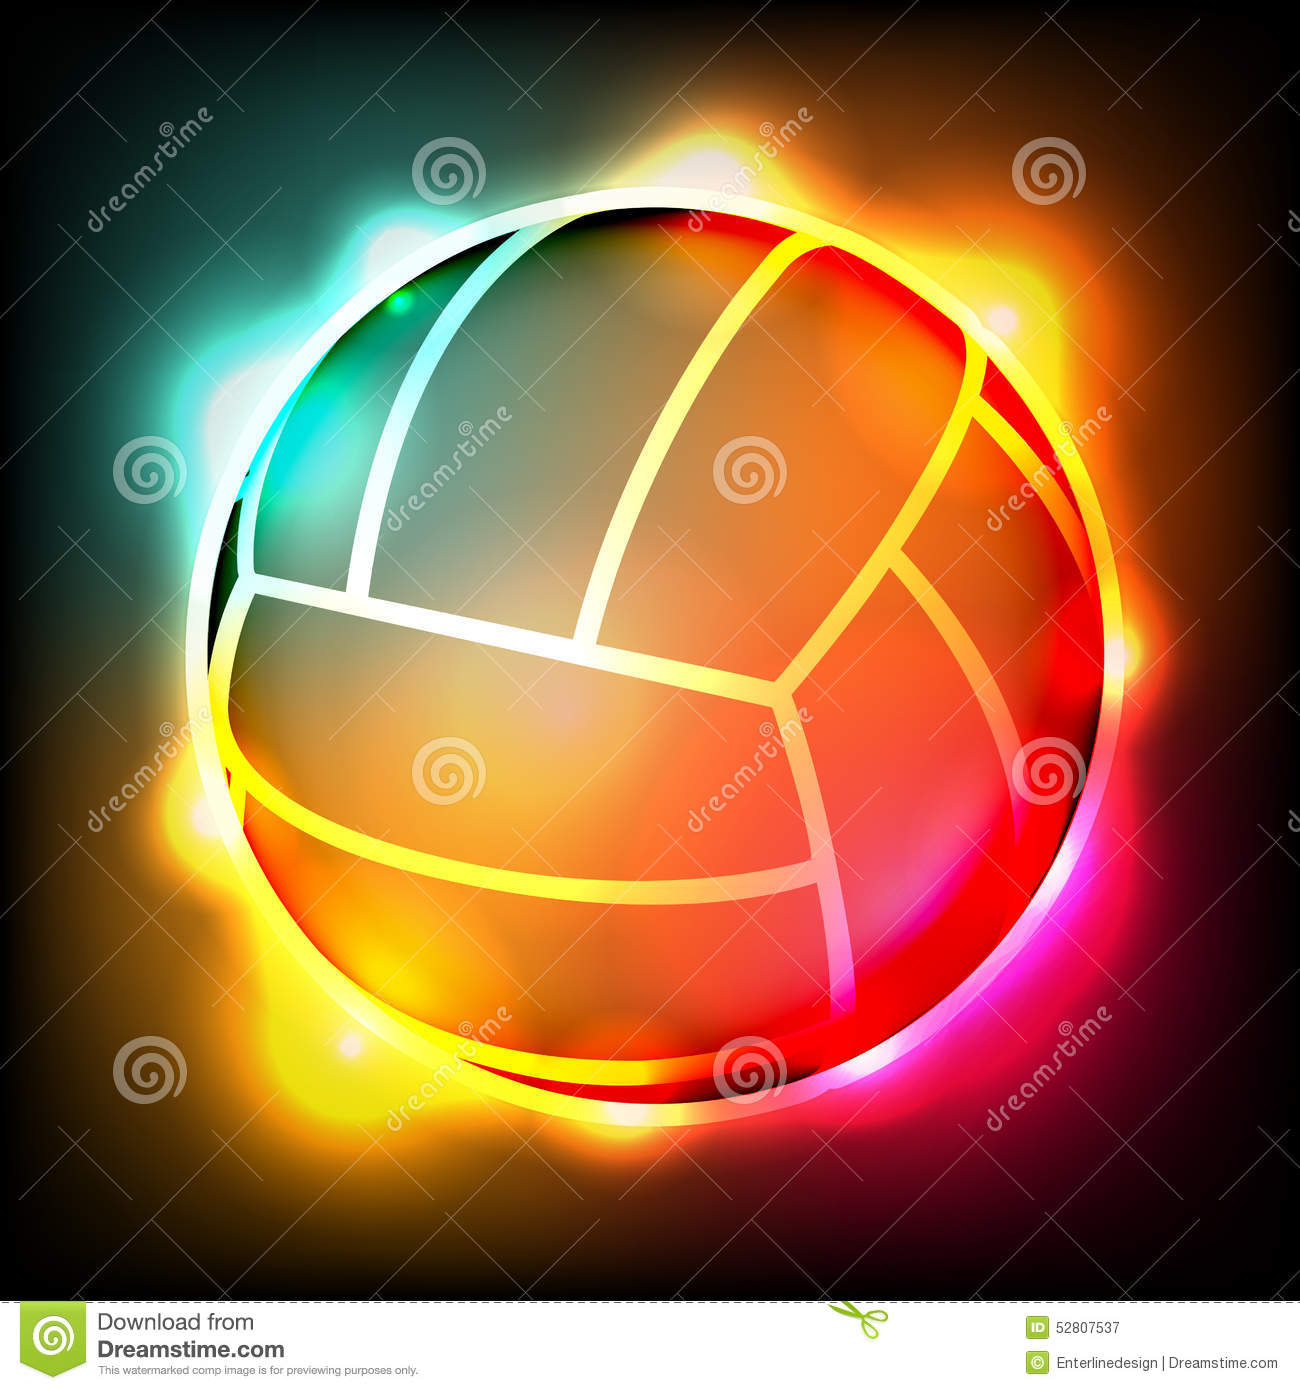 Best Volleyball Wallpapers